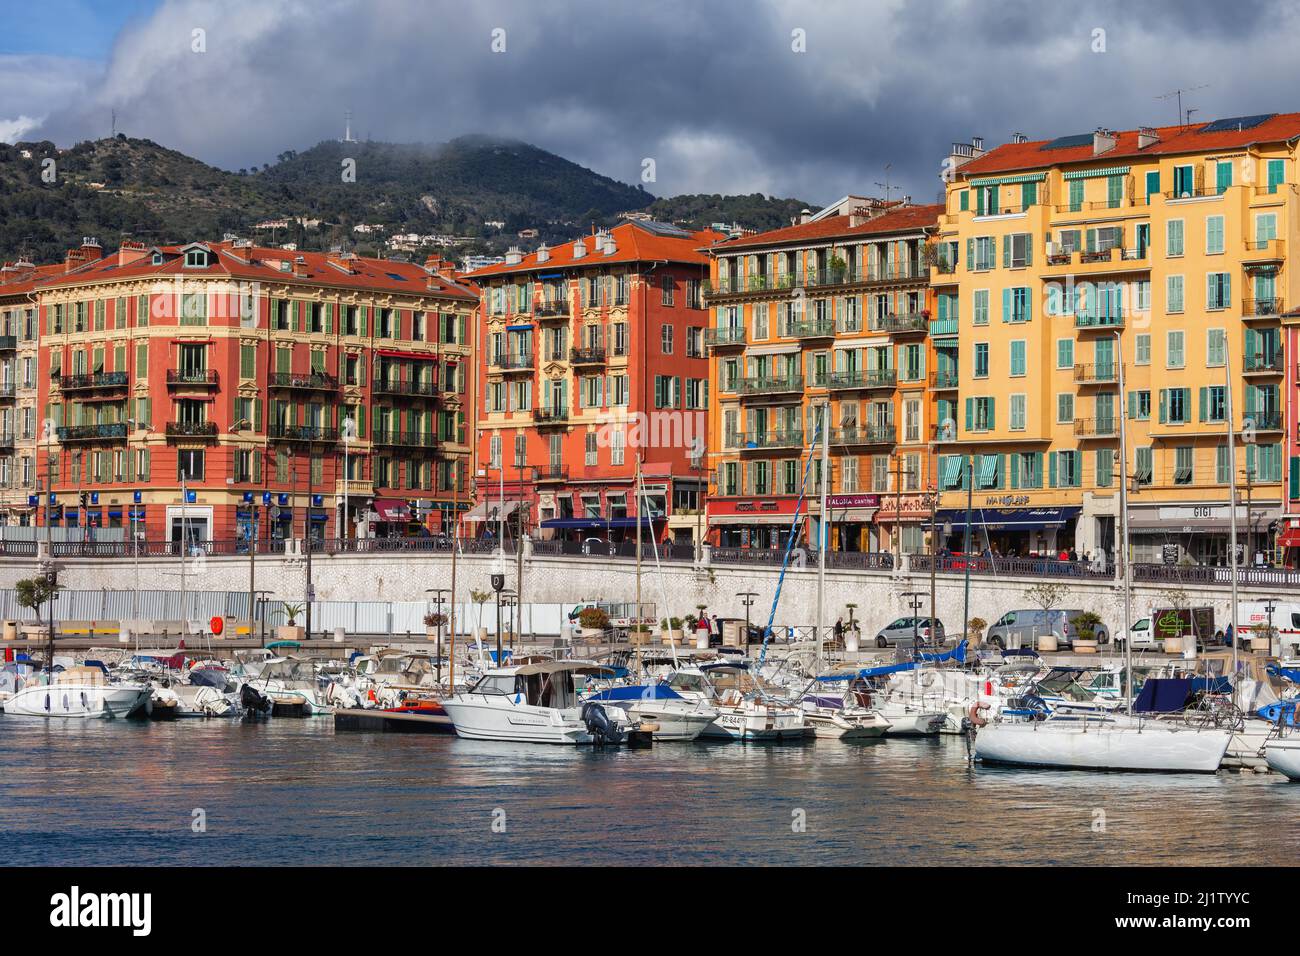 Nice, France - April 13, 2018: Buildings and boats in Port Lympia, Old Port of Nice on French Riviera. Stock Photo